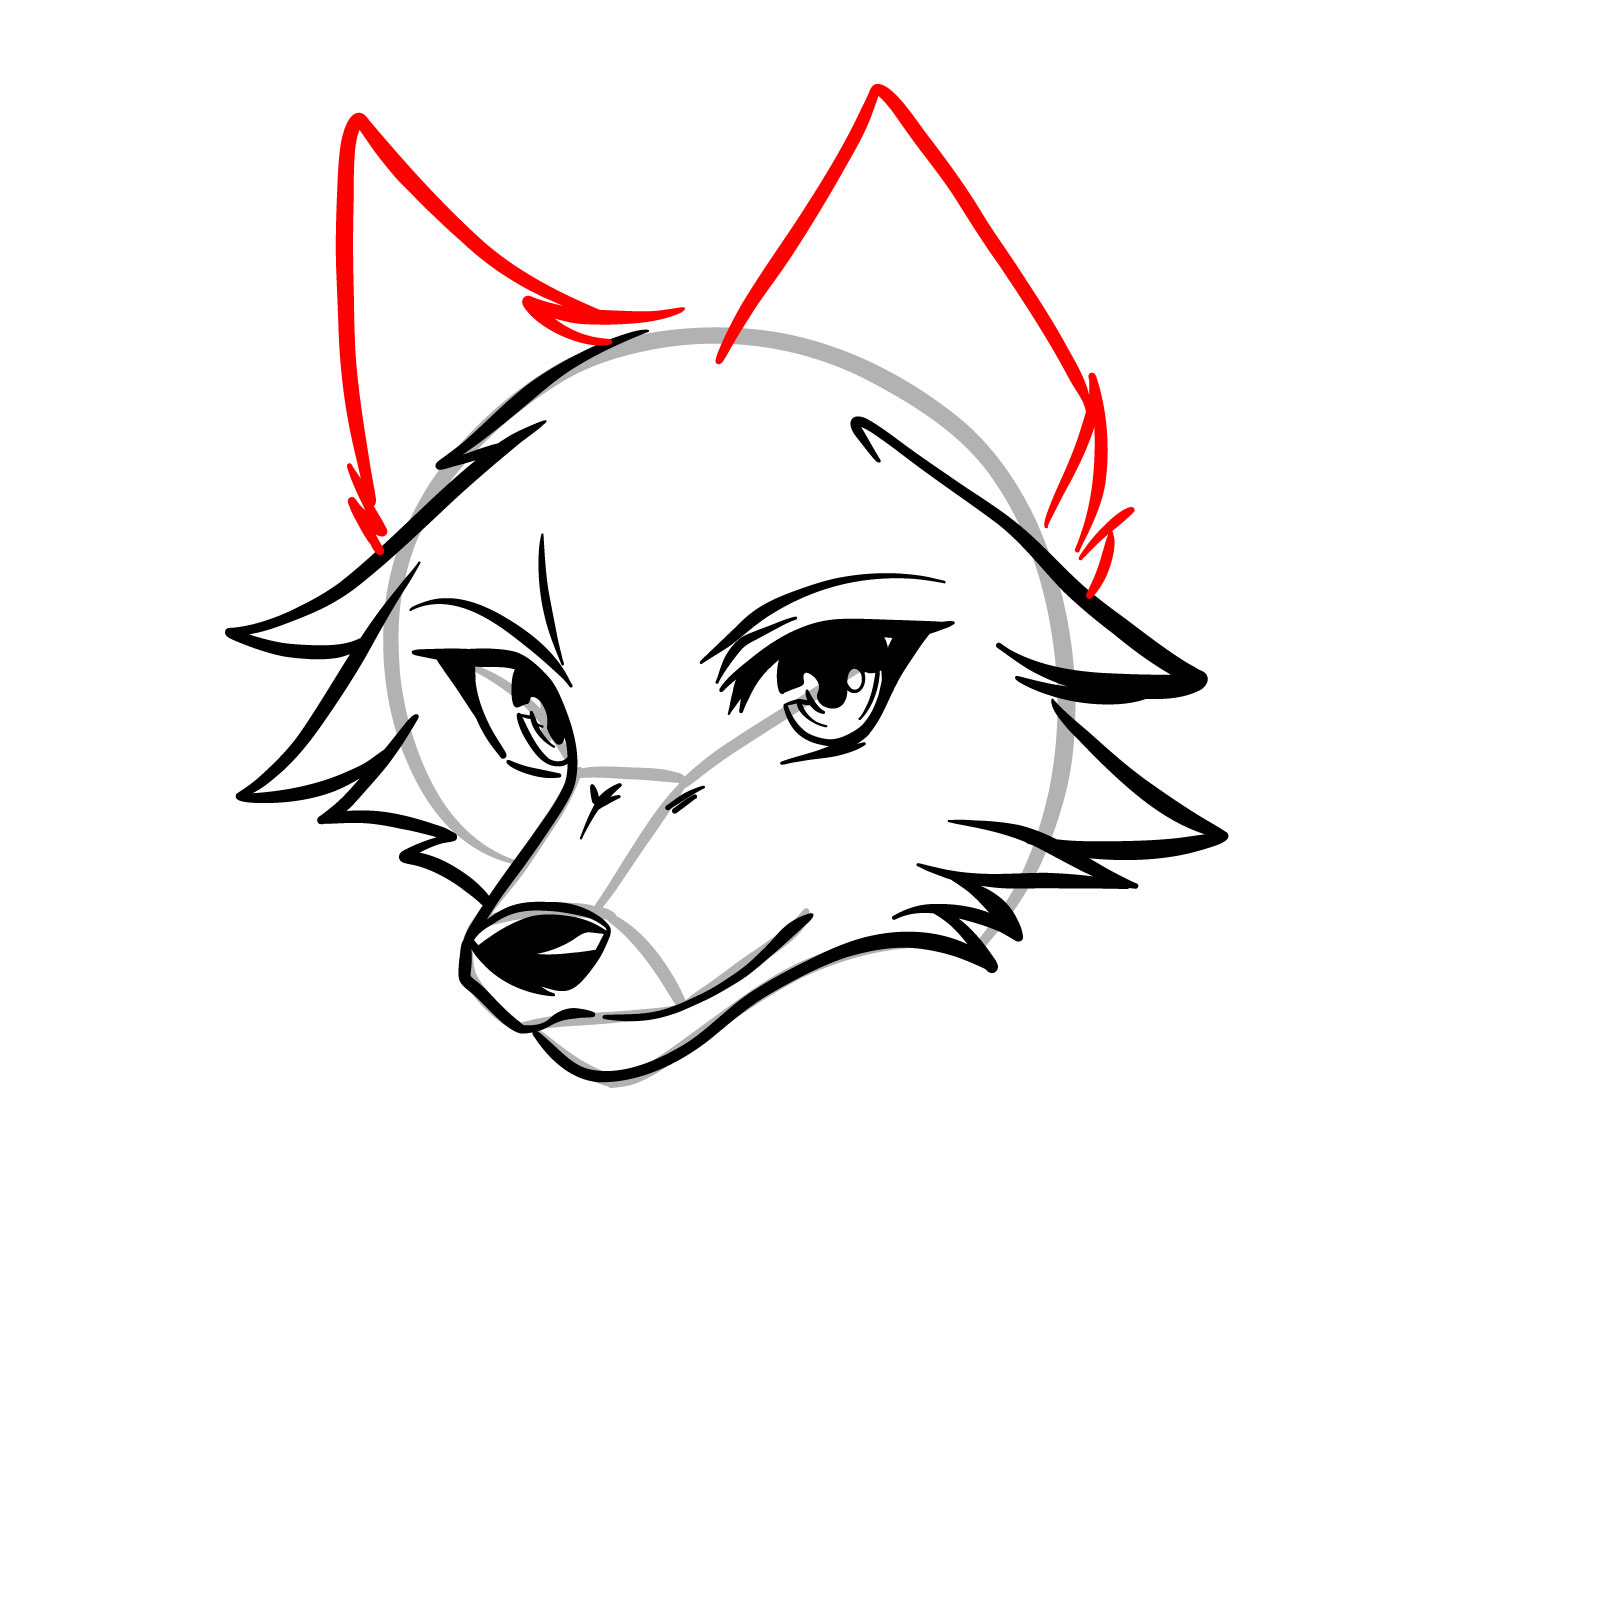 Step 7 of how to draw an anime wolf face, focusing on adding the ears